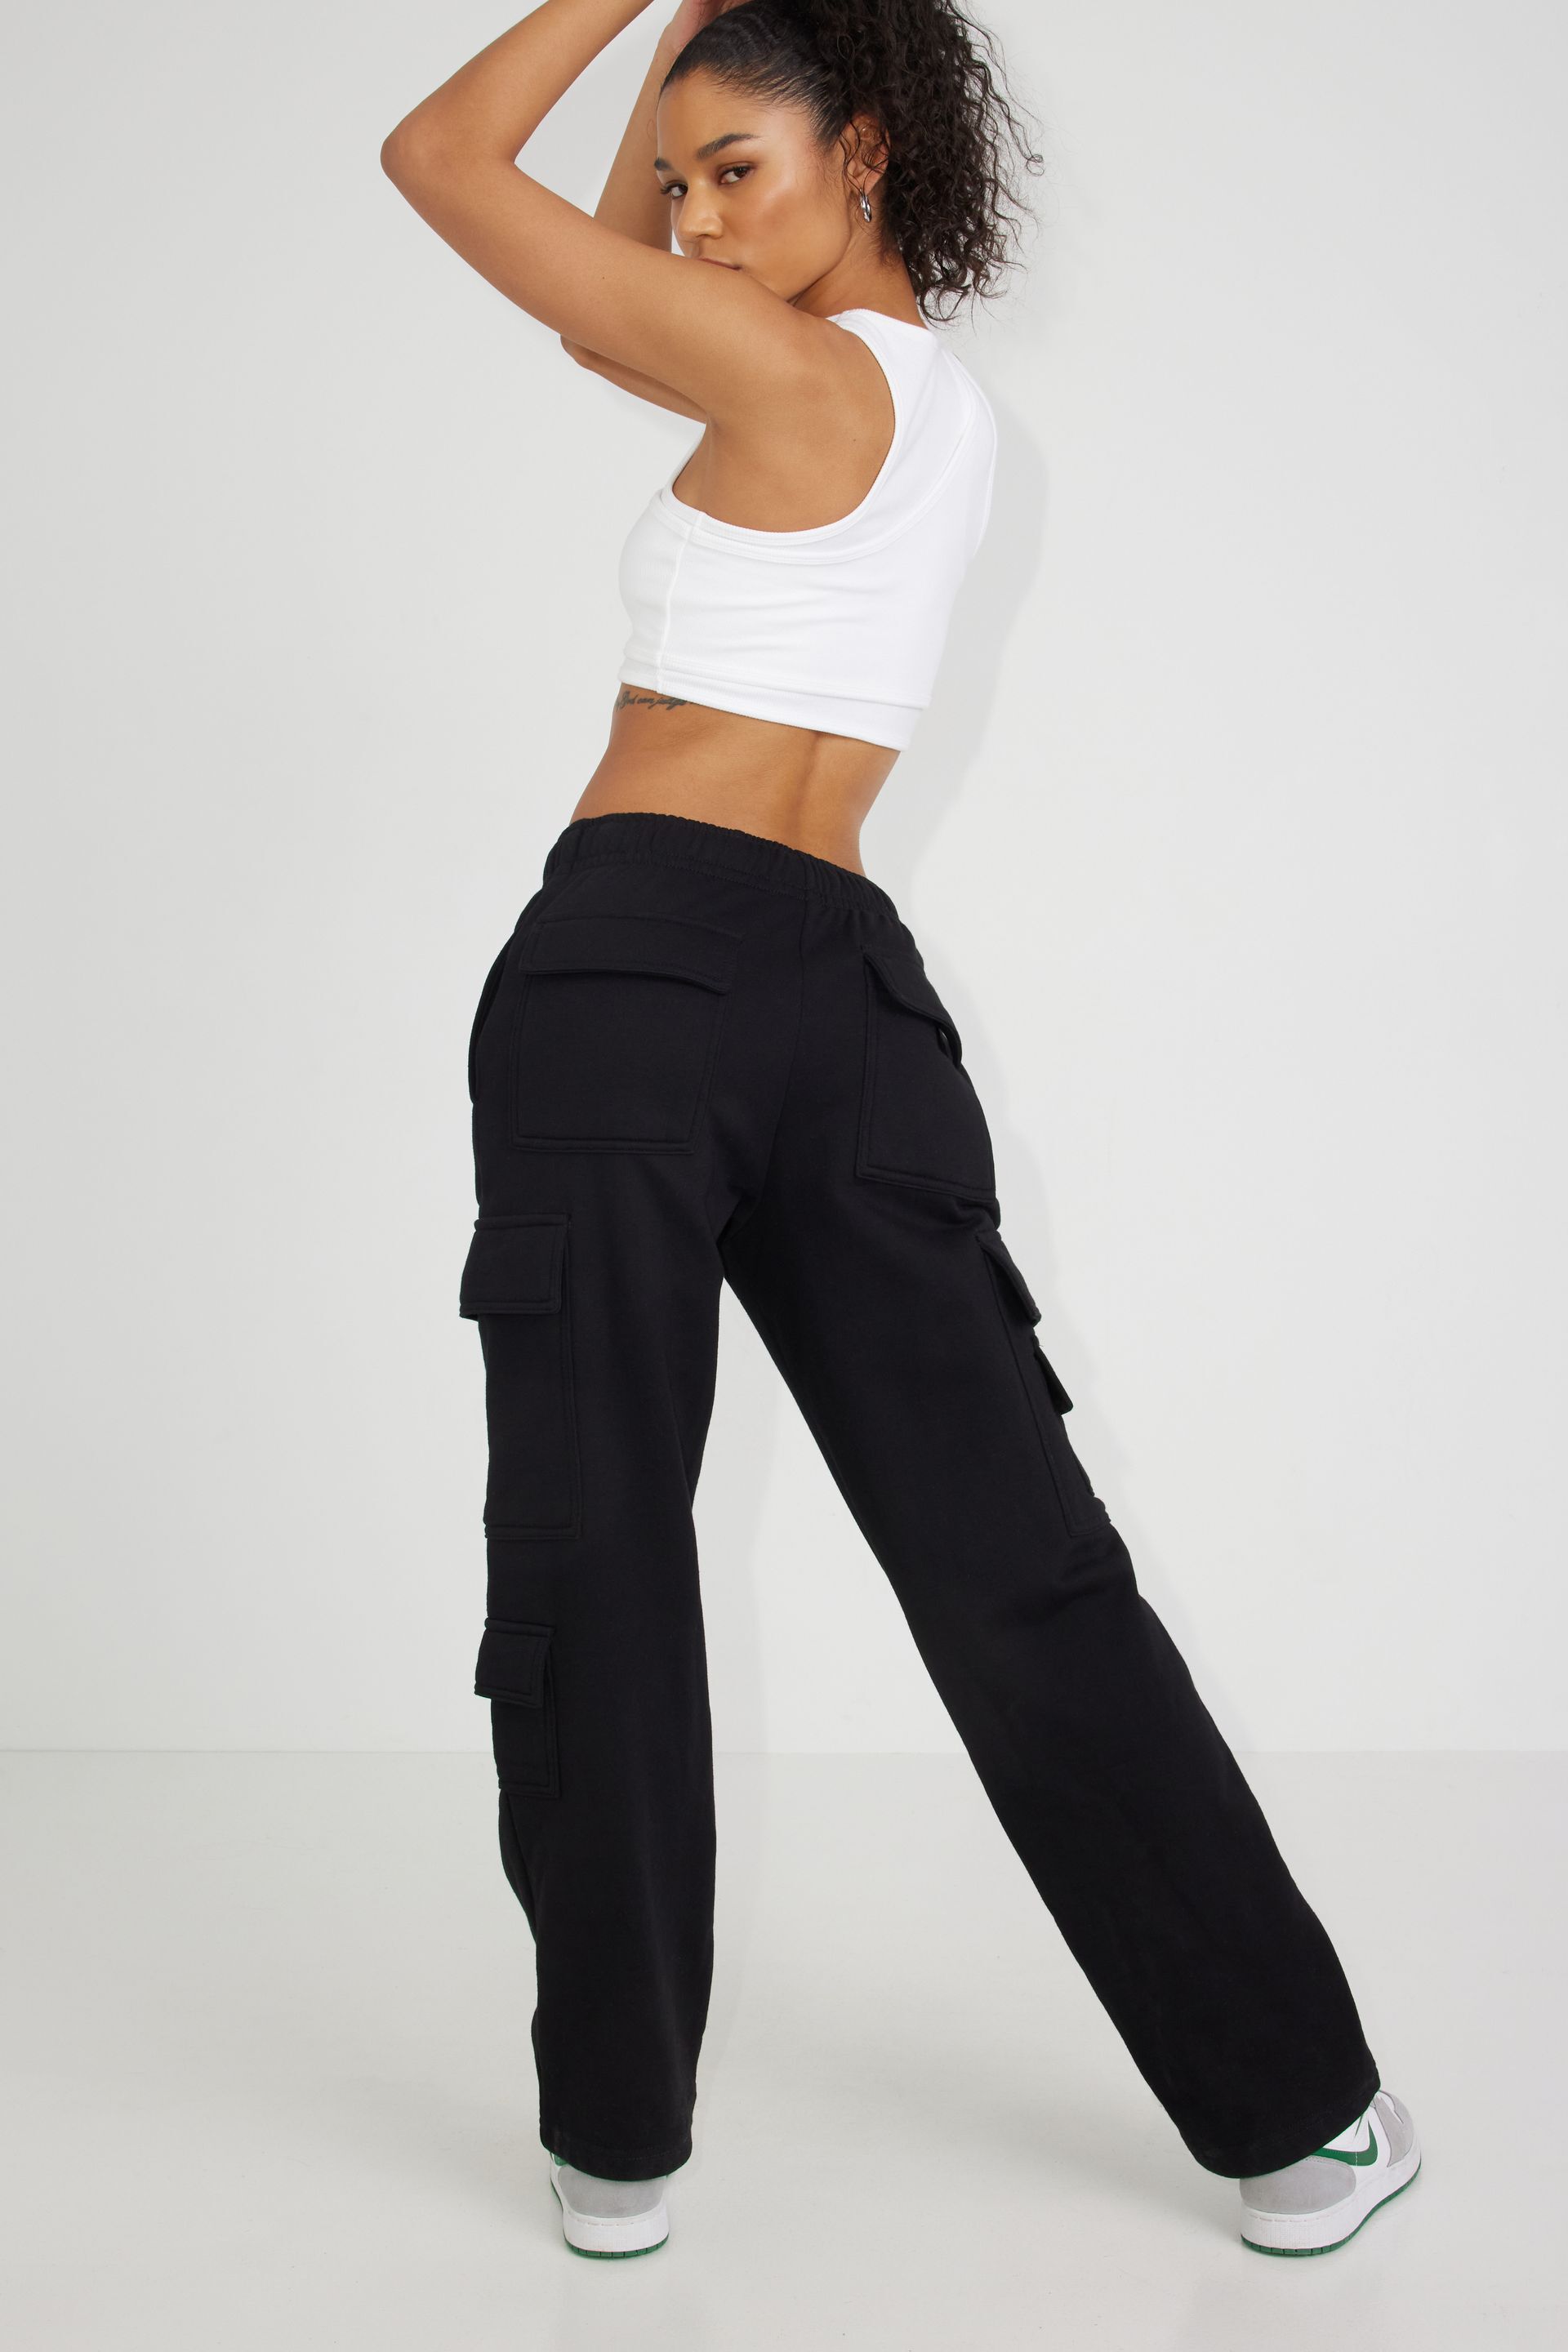 Women's Parachute Trousers | Strictly Influential